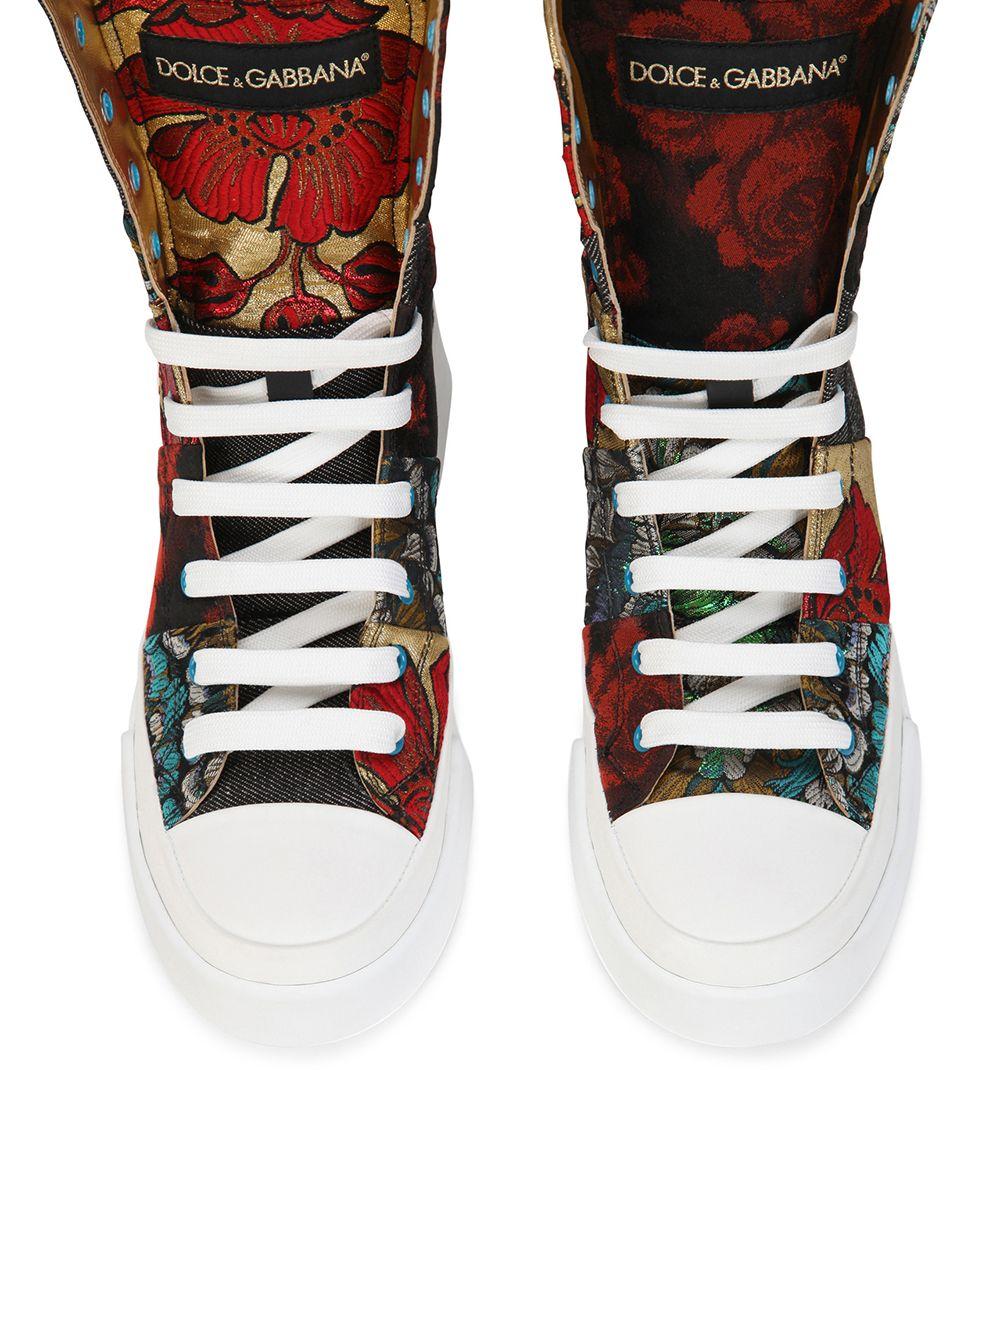 Dolce & Gabbana Patchwork-print Sneakers in Red | Lyst